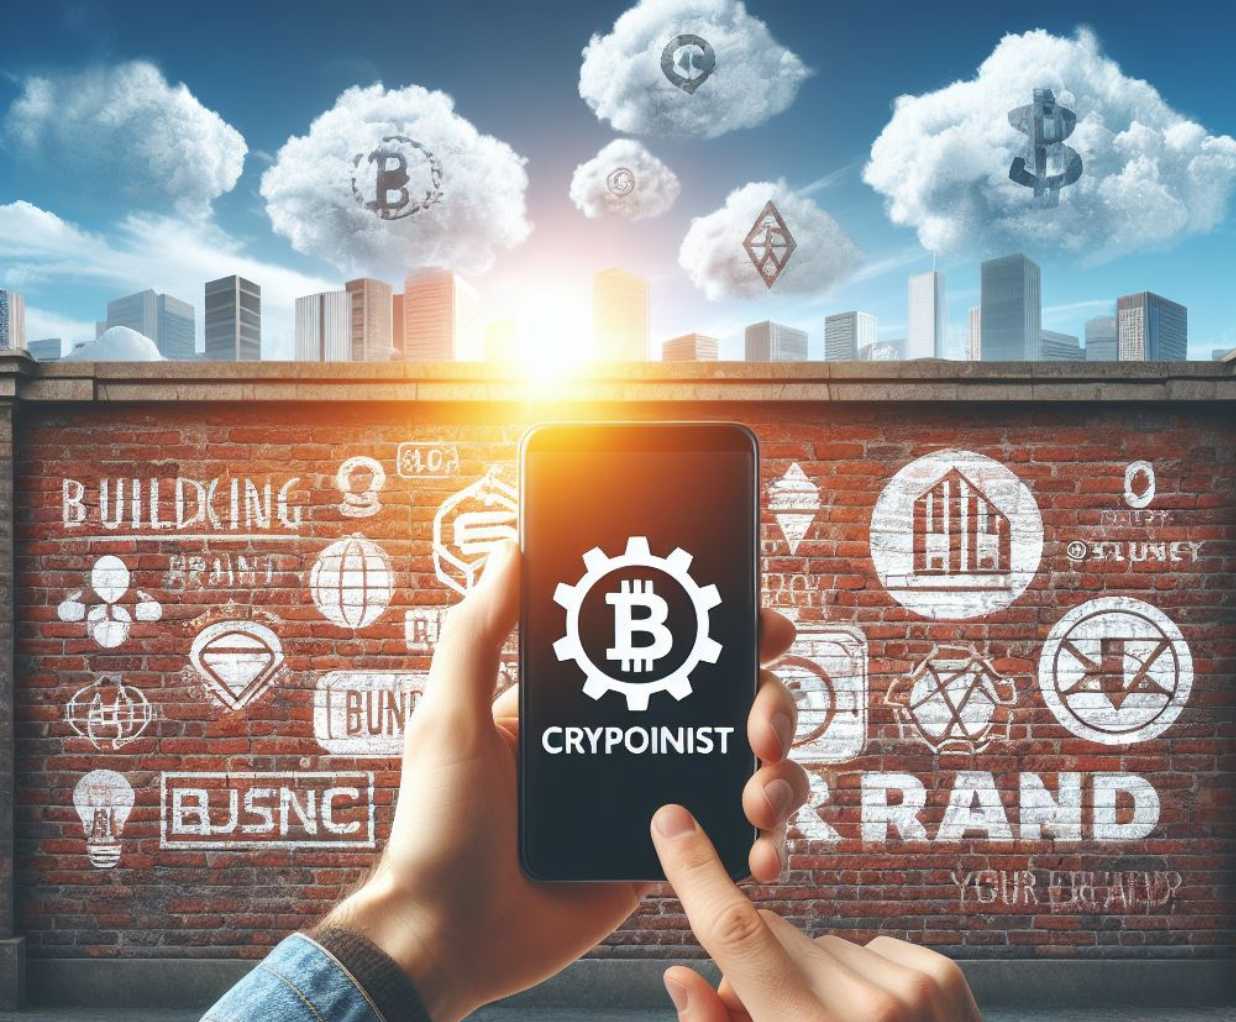 Building Your Brand with Cryptoinist.com